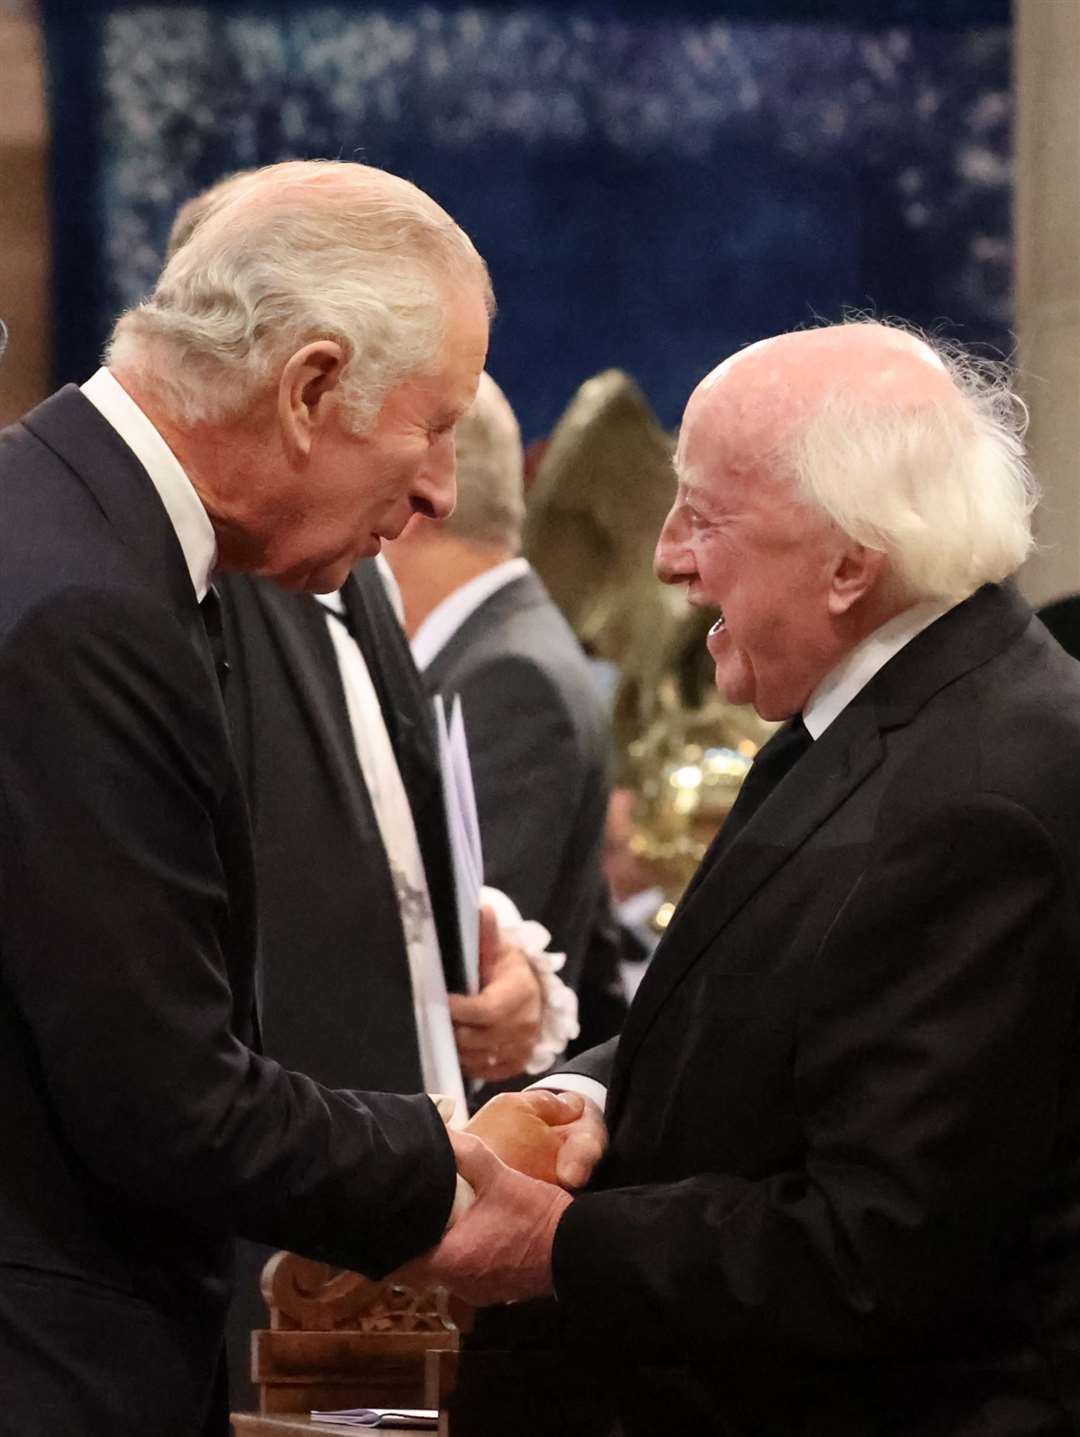 The King and Irish President Michael D Higgins have met on a number of occasions (Liam McBurney/PA)